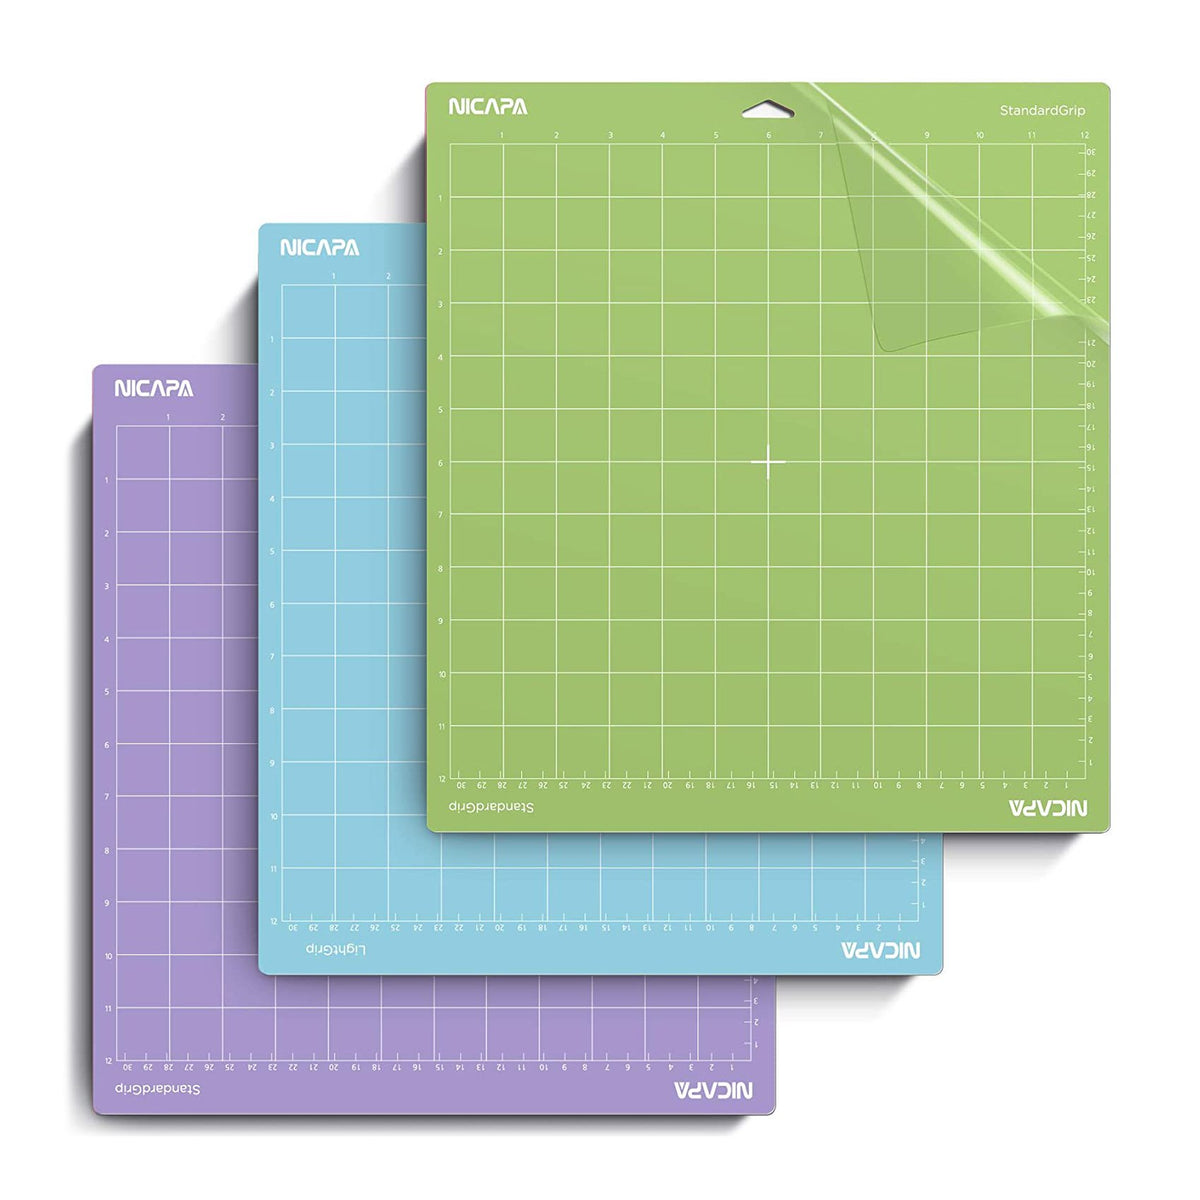 6 Cricut StandardGrip Cutting Mats 12 x 12 and 12 x 24, use with Explo